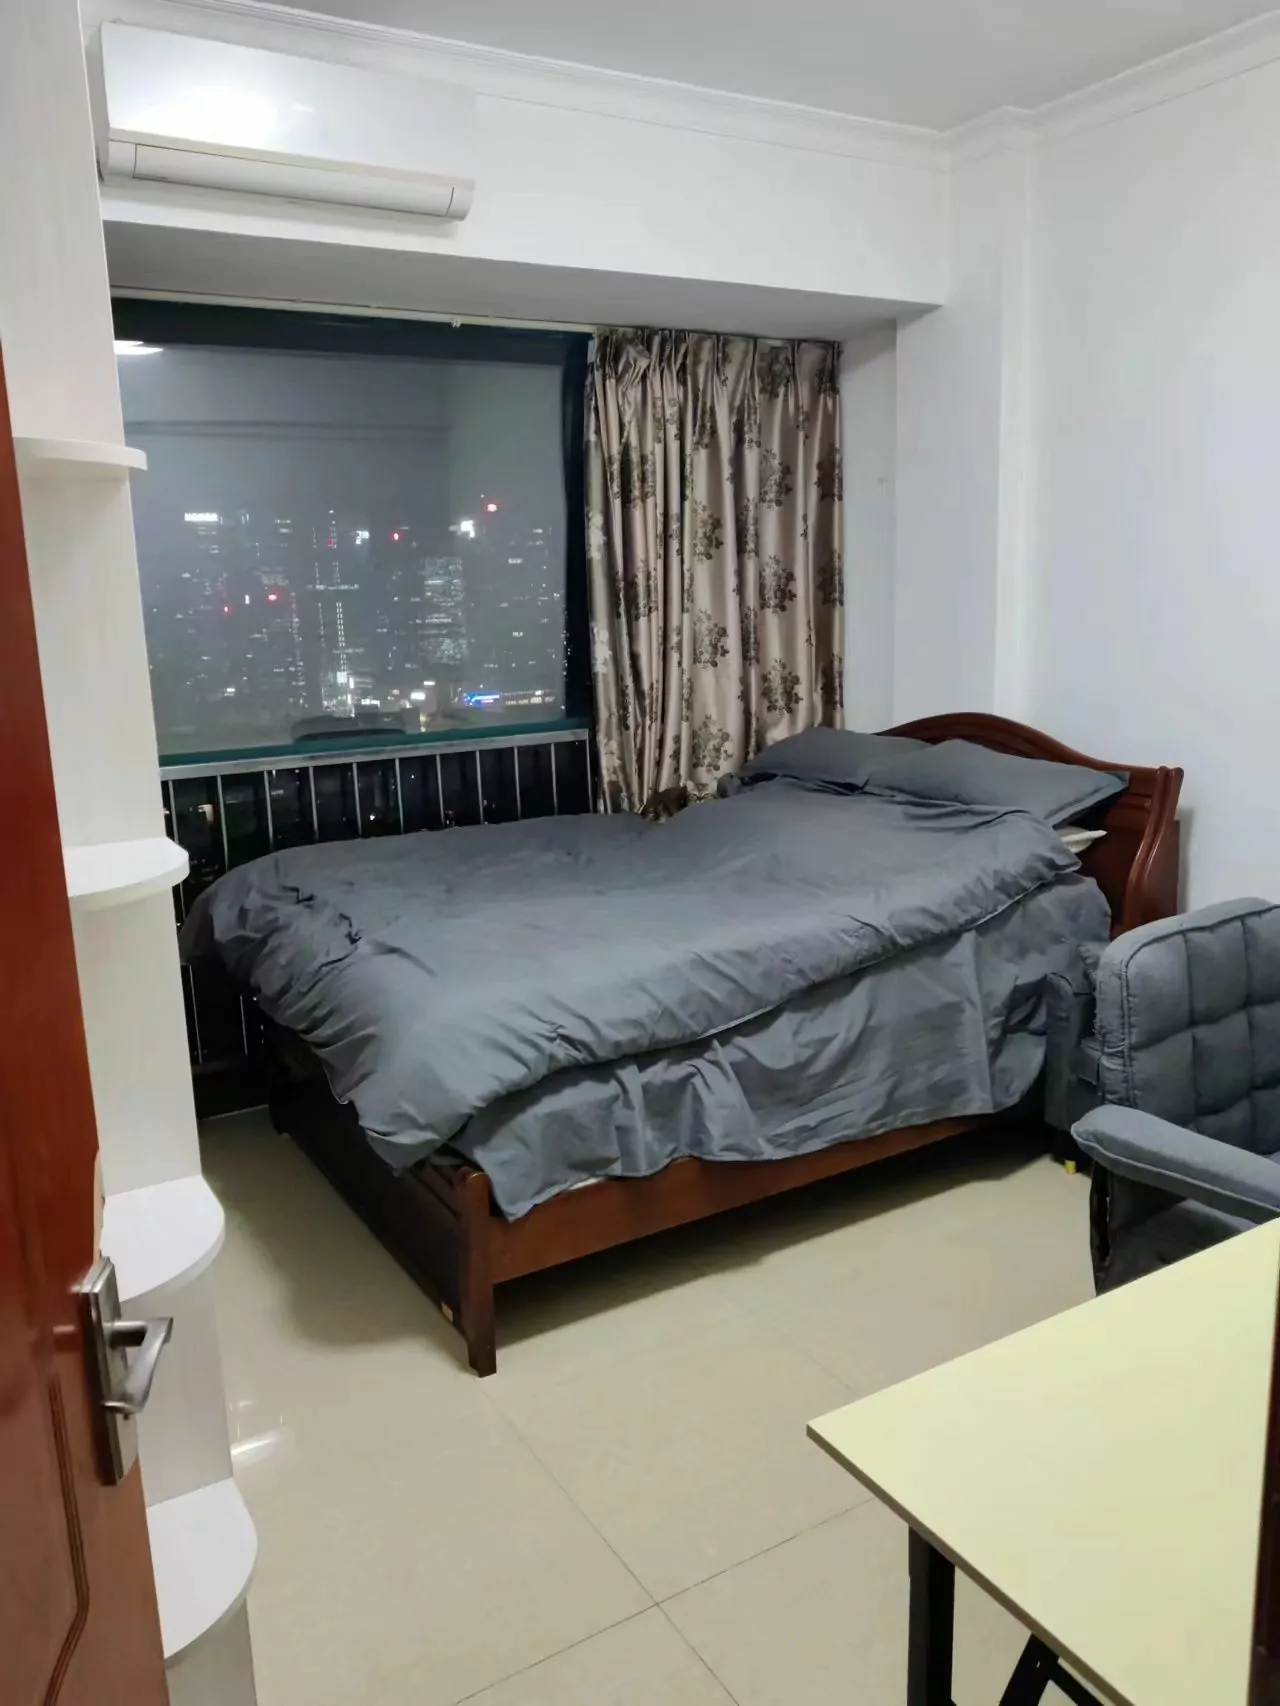 Featured image for “Master Bedroom in a 2 bedroom apartment in Futian for rent”